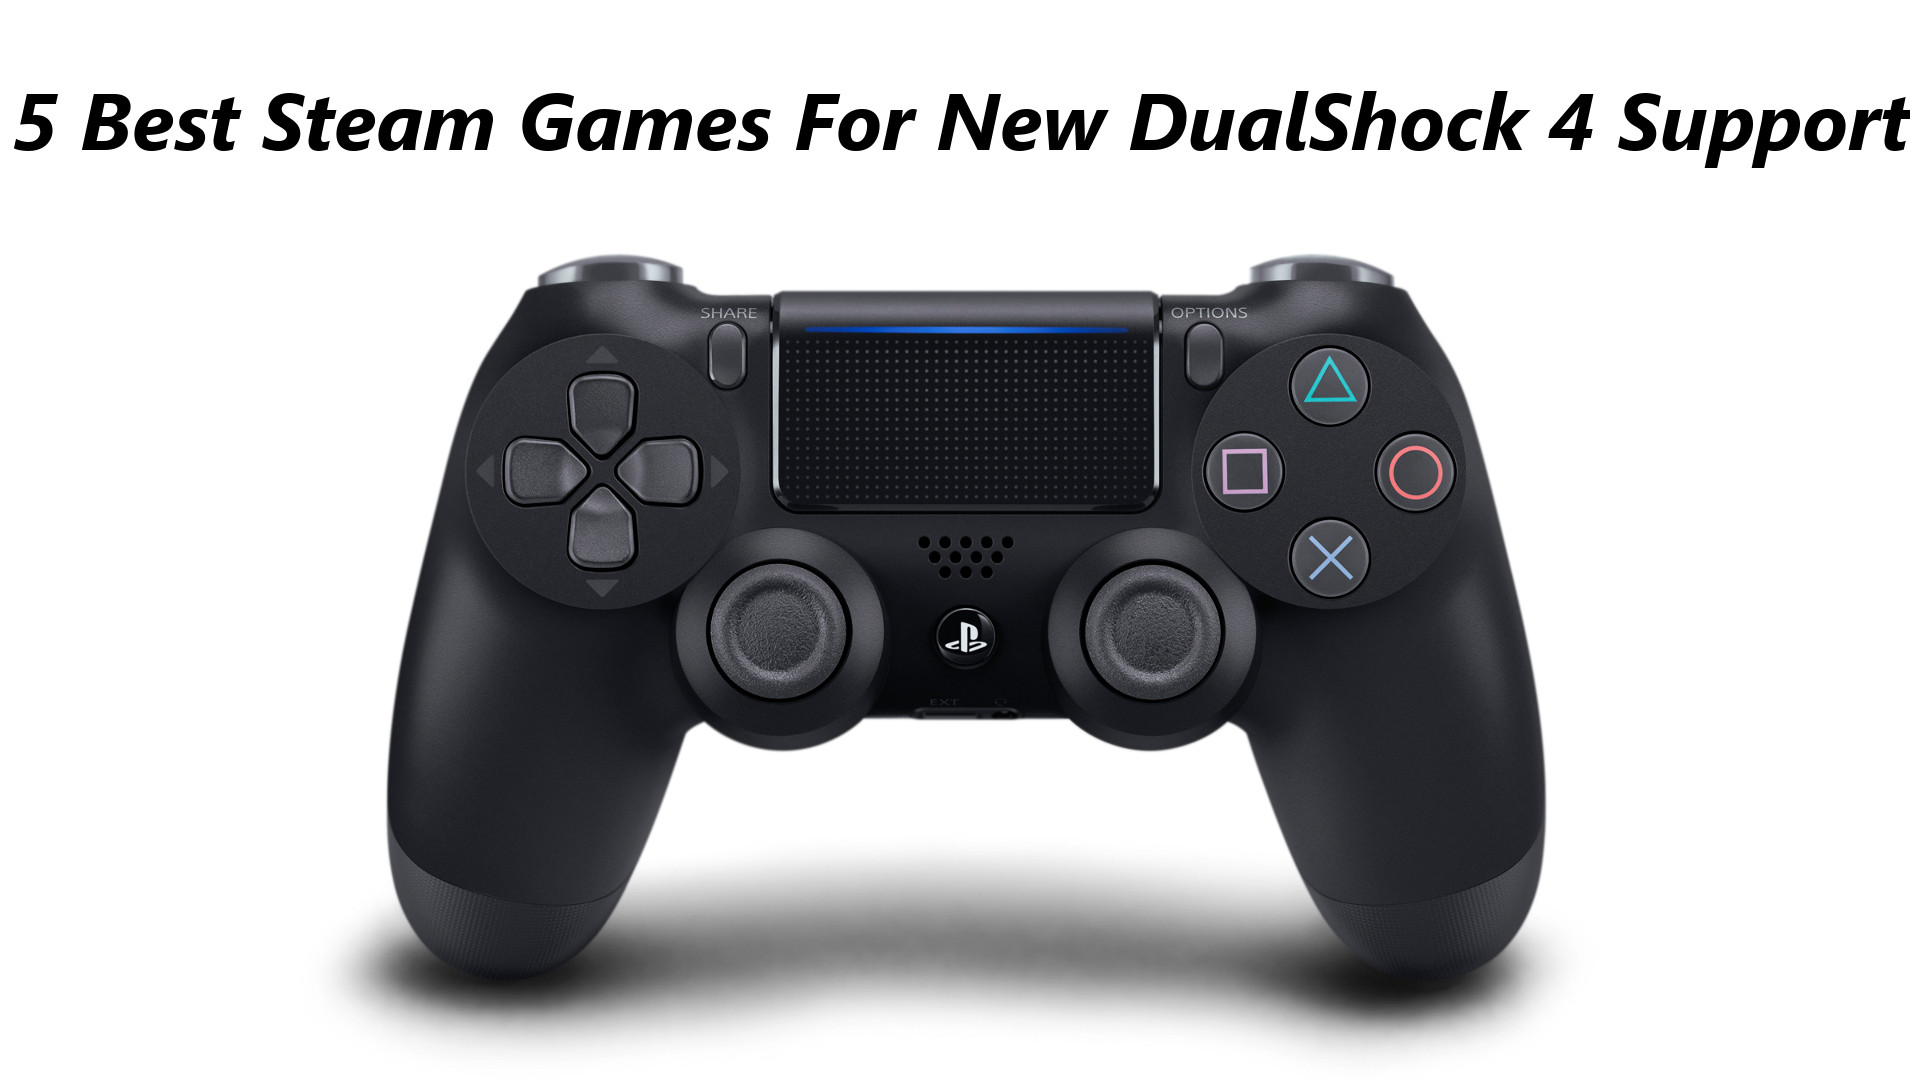 Best Steam Games For The New DualShock 4 Support #6